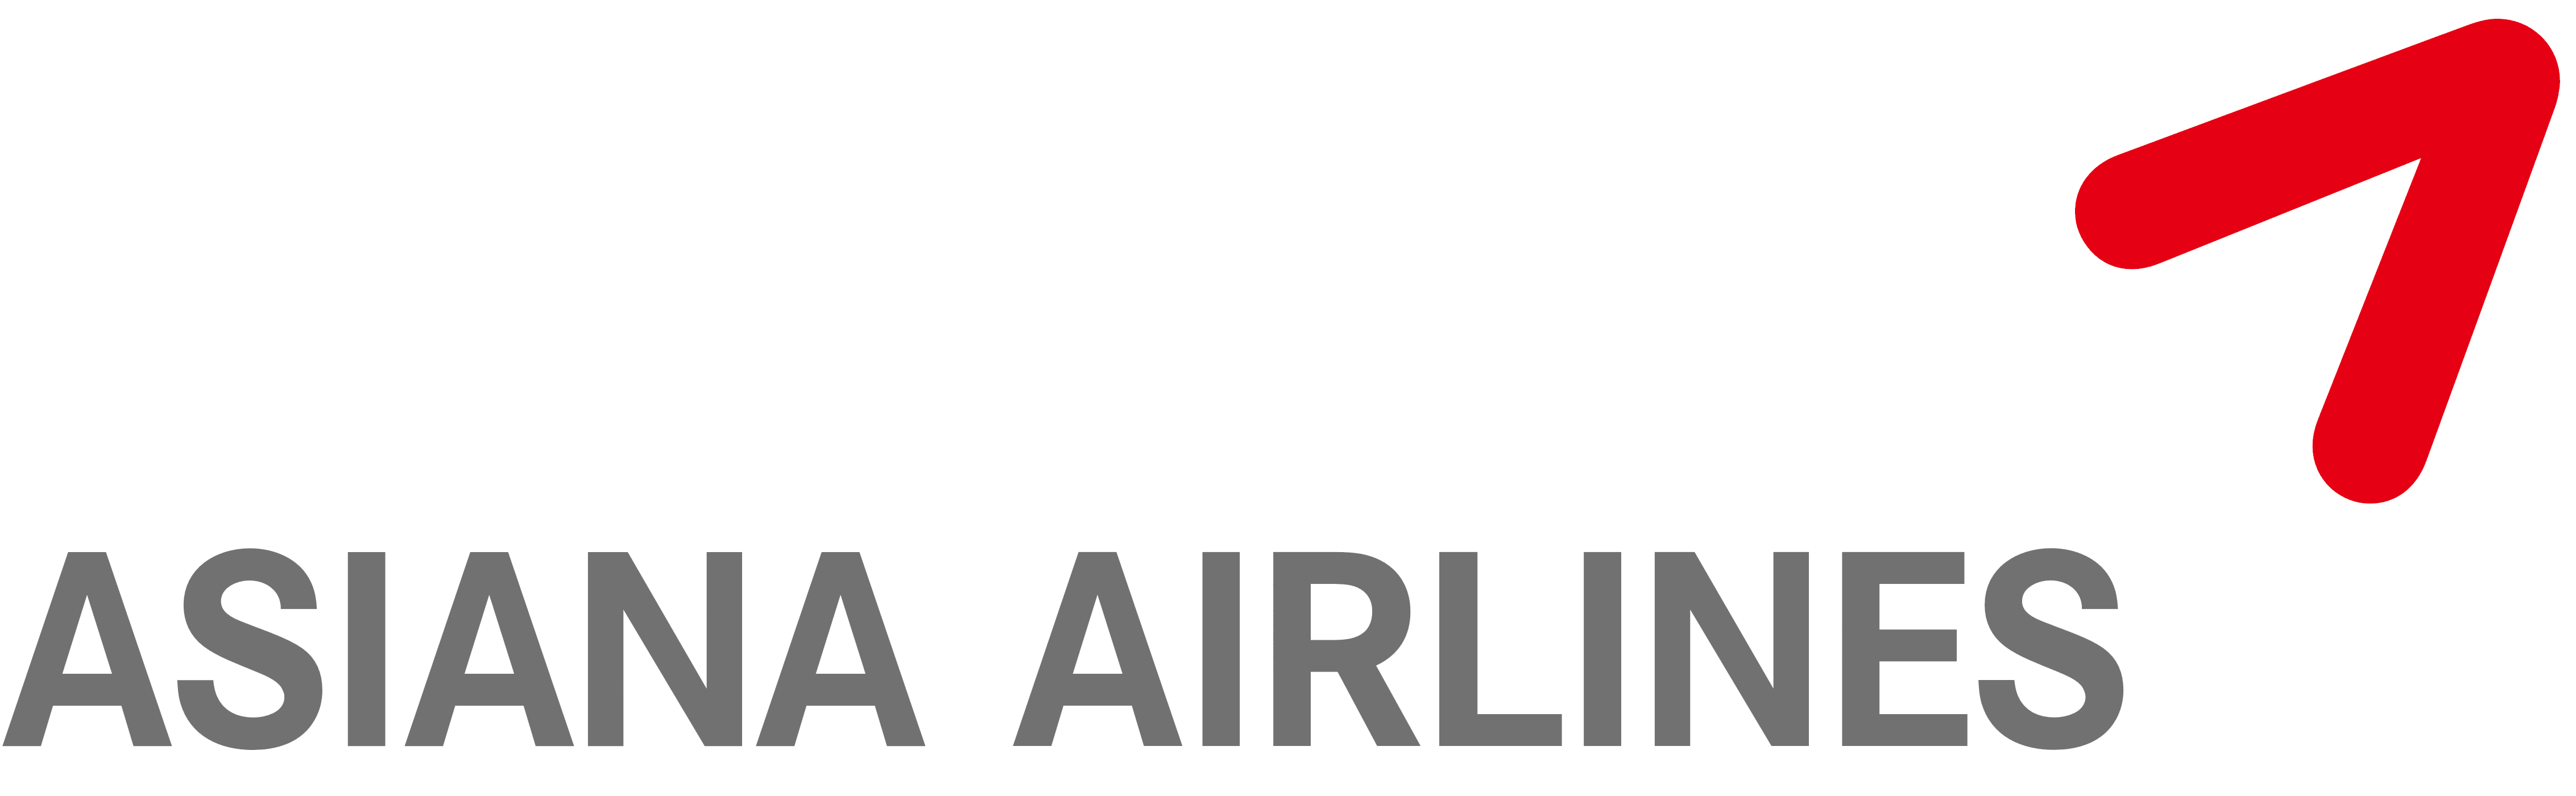 Asiana Airlines PNG - 97292